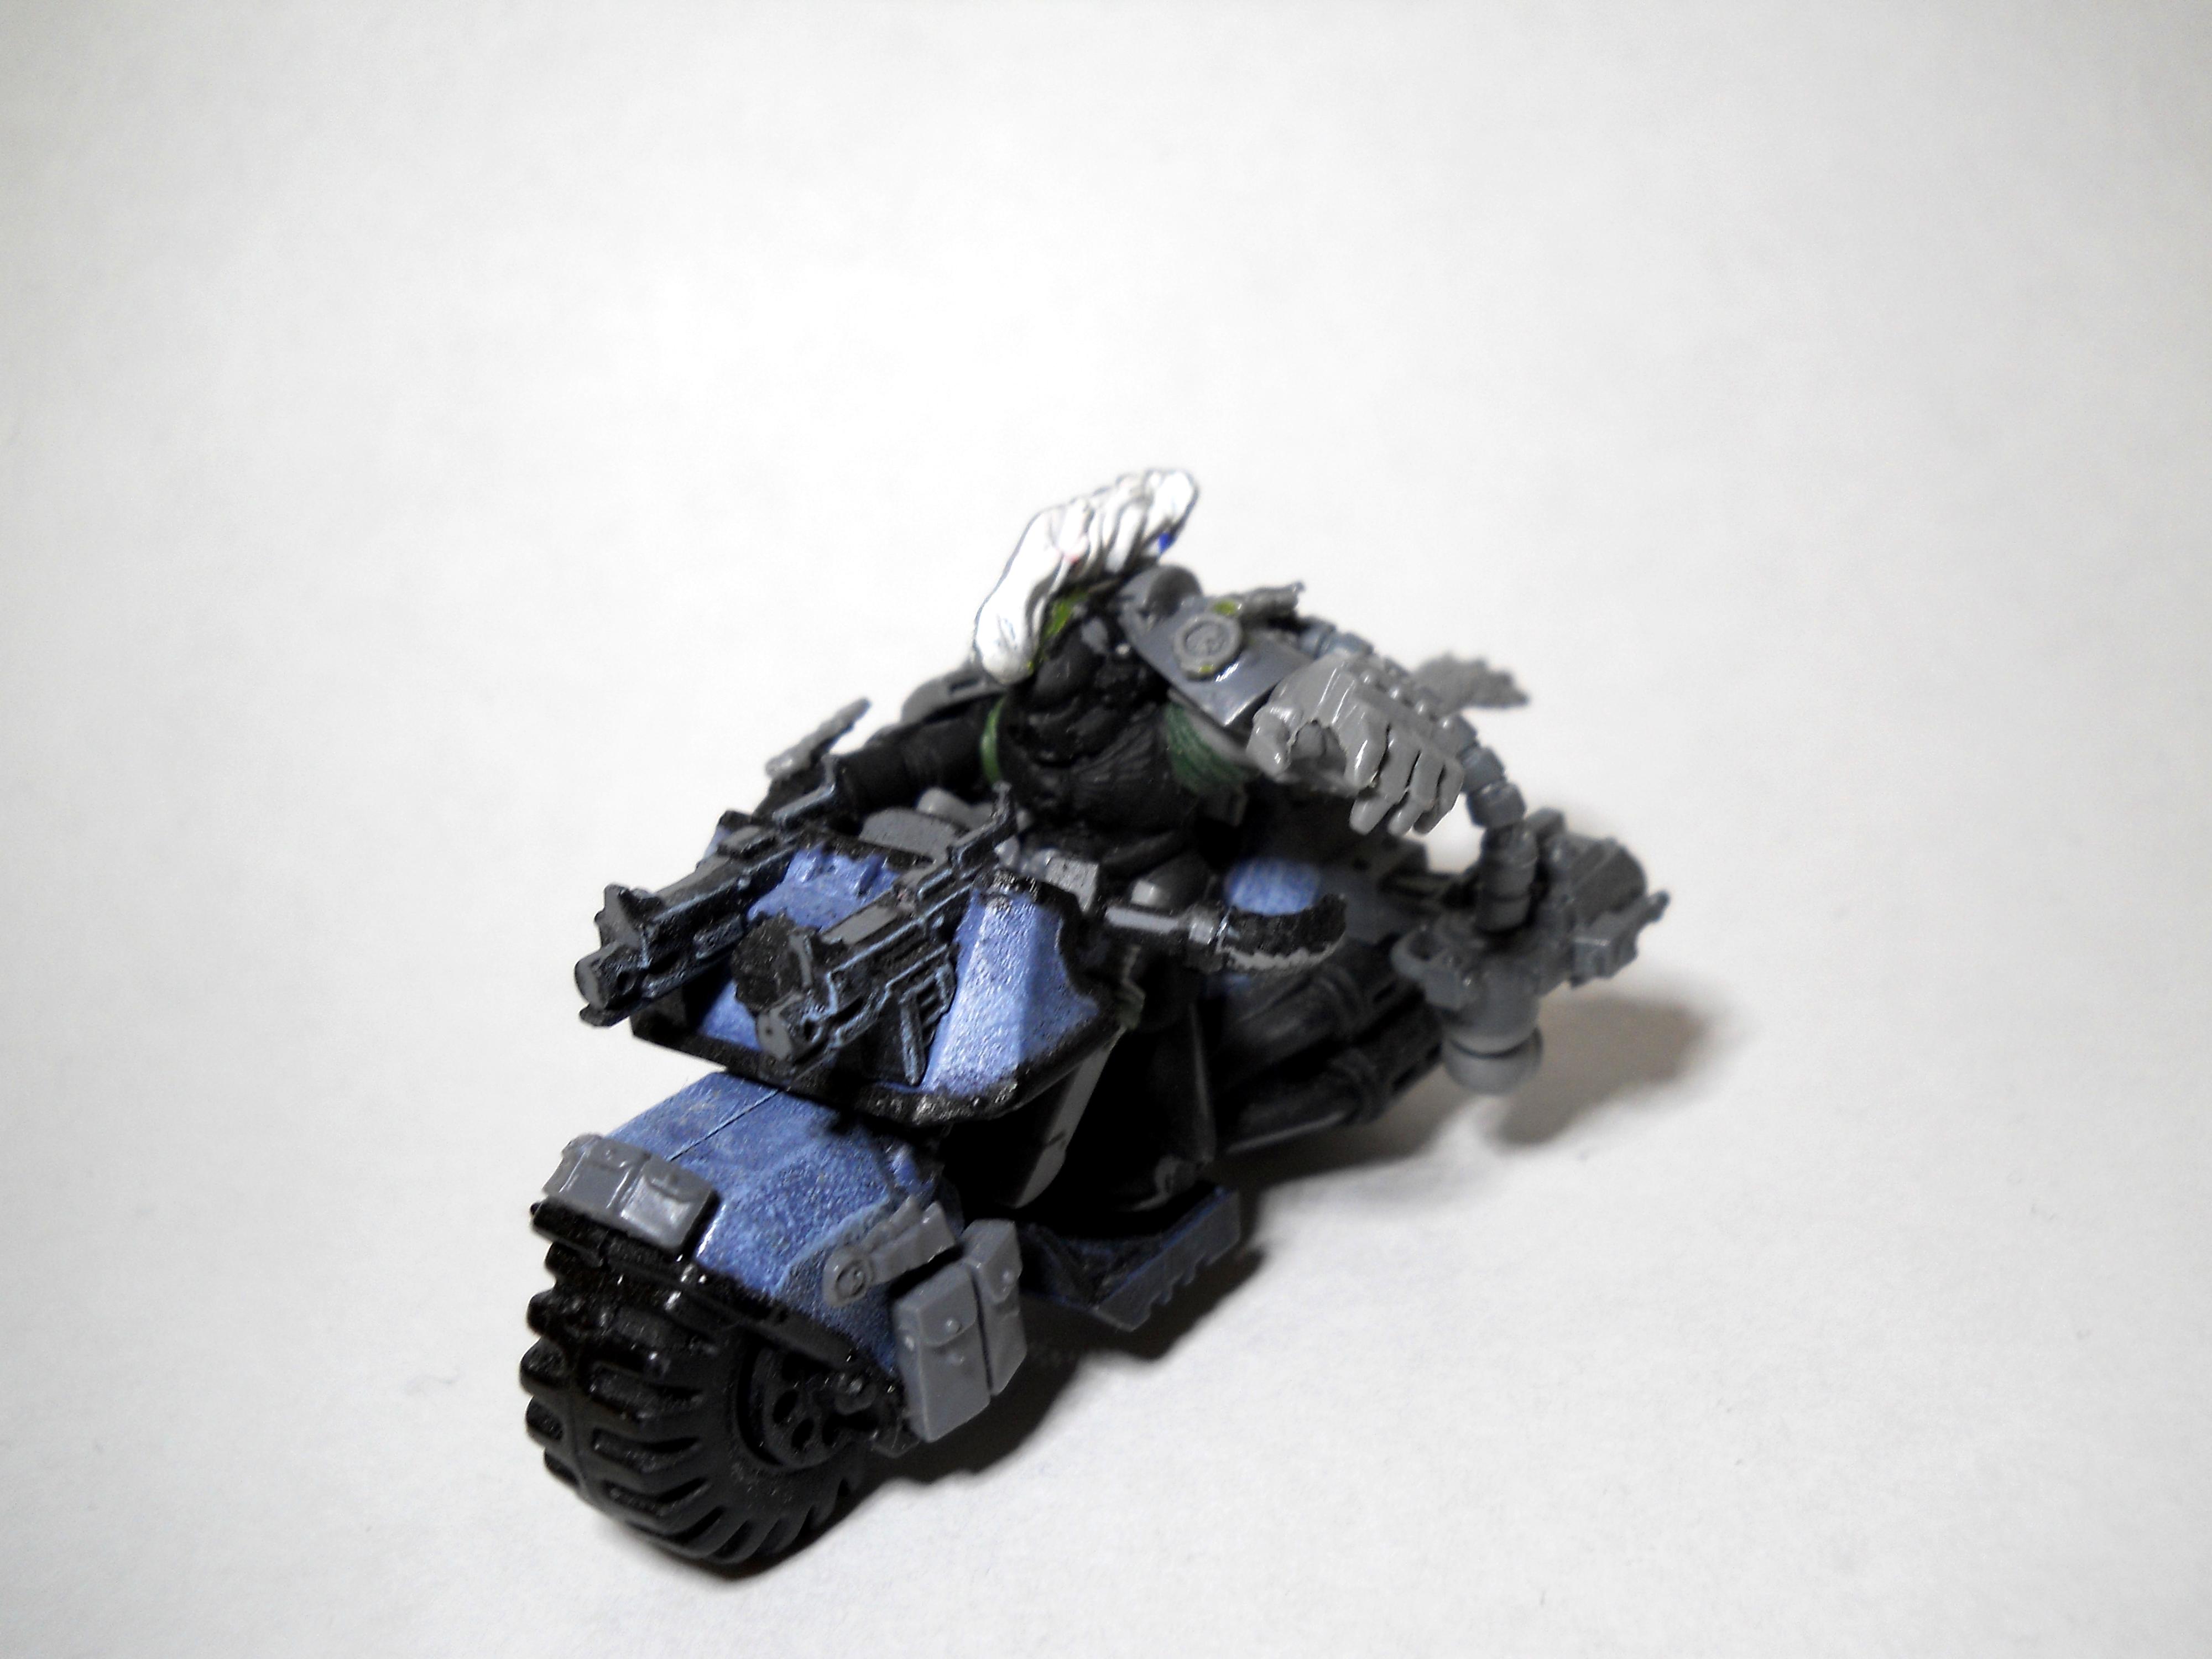 Bike, Conversion, Power Fist, Space Marines, Space Wolves